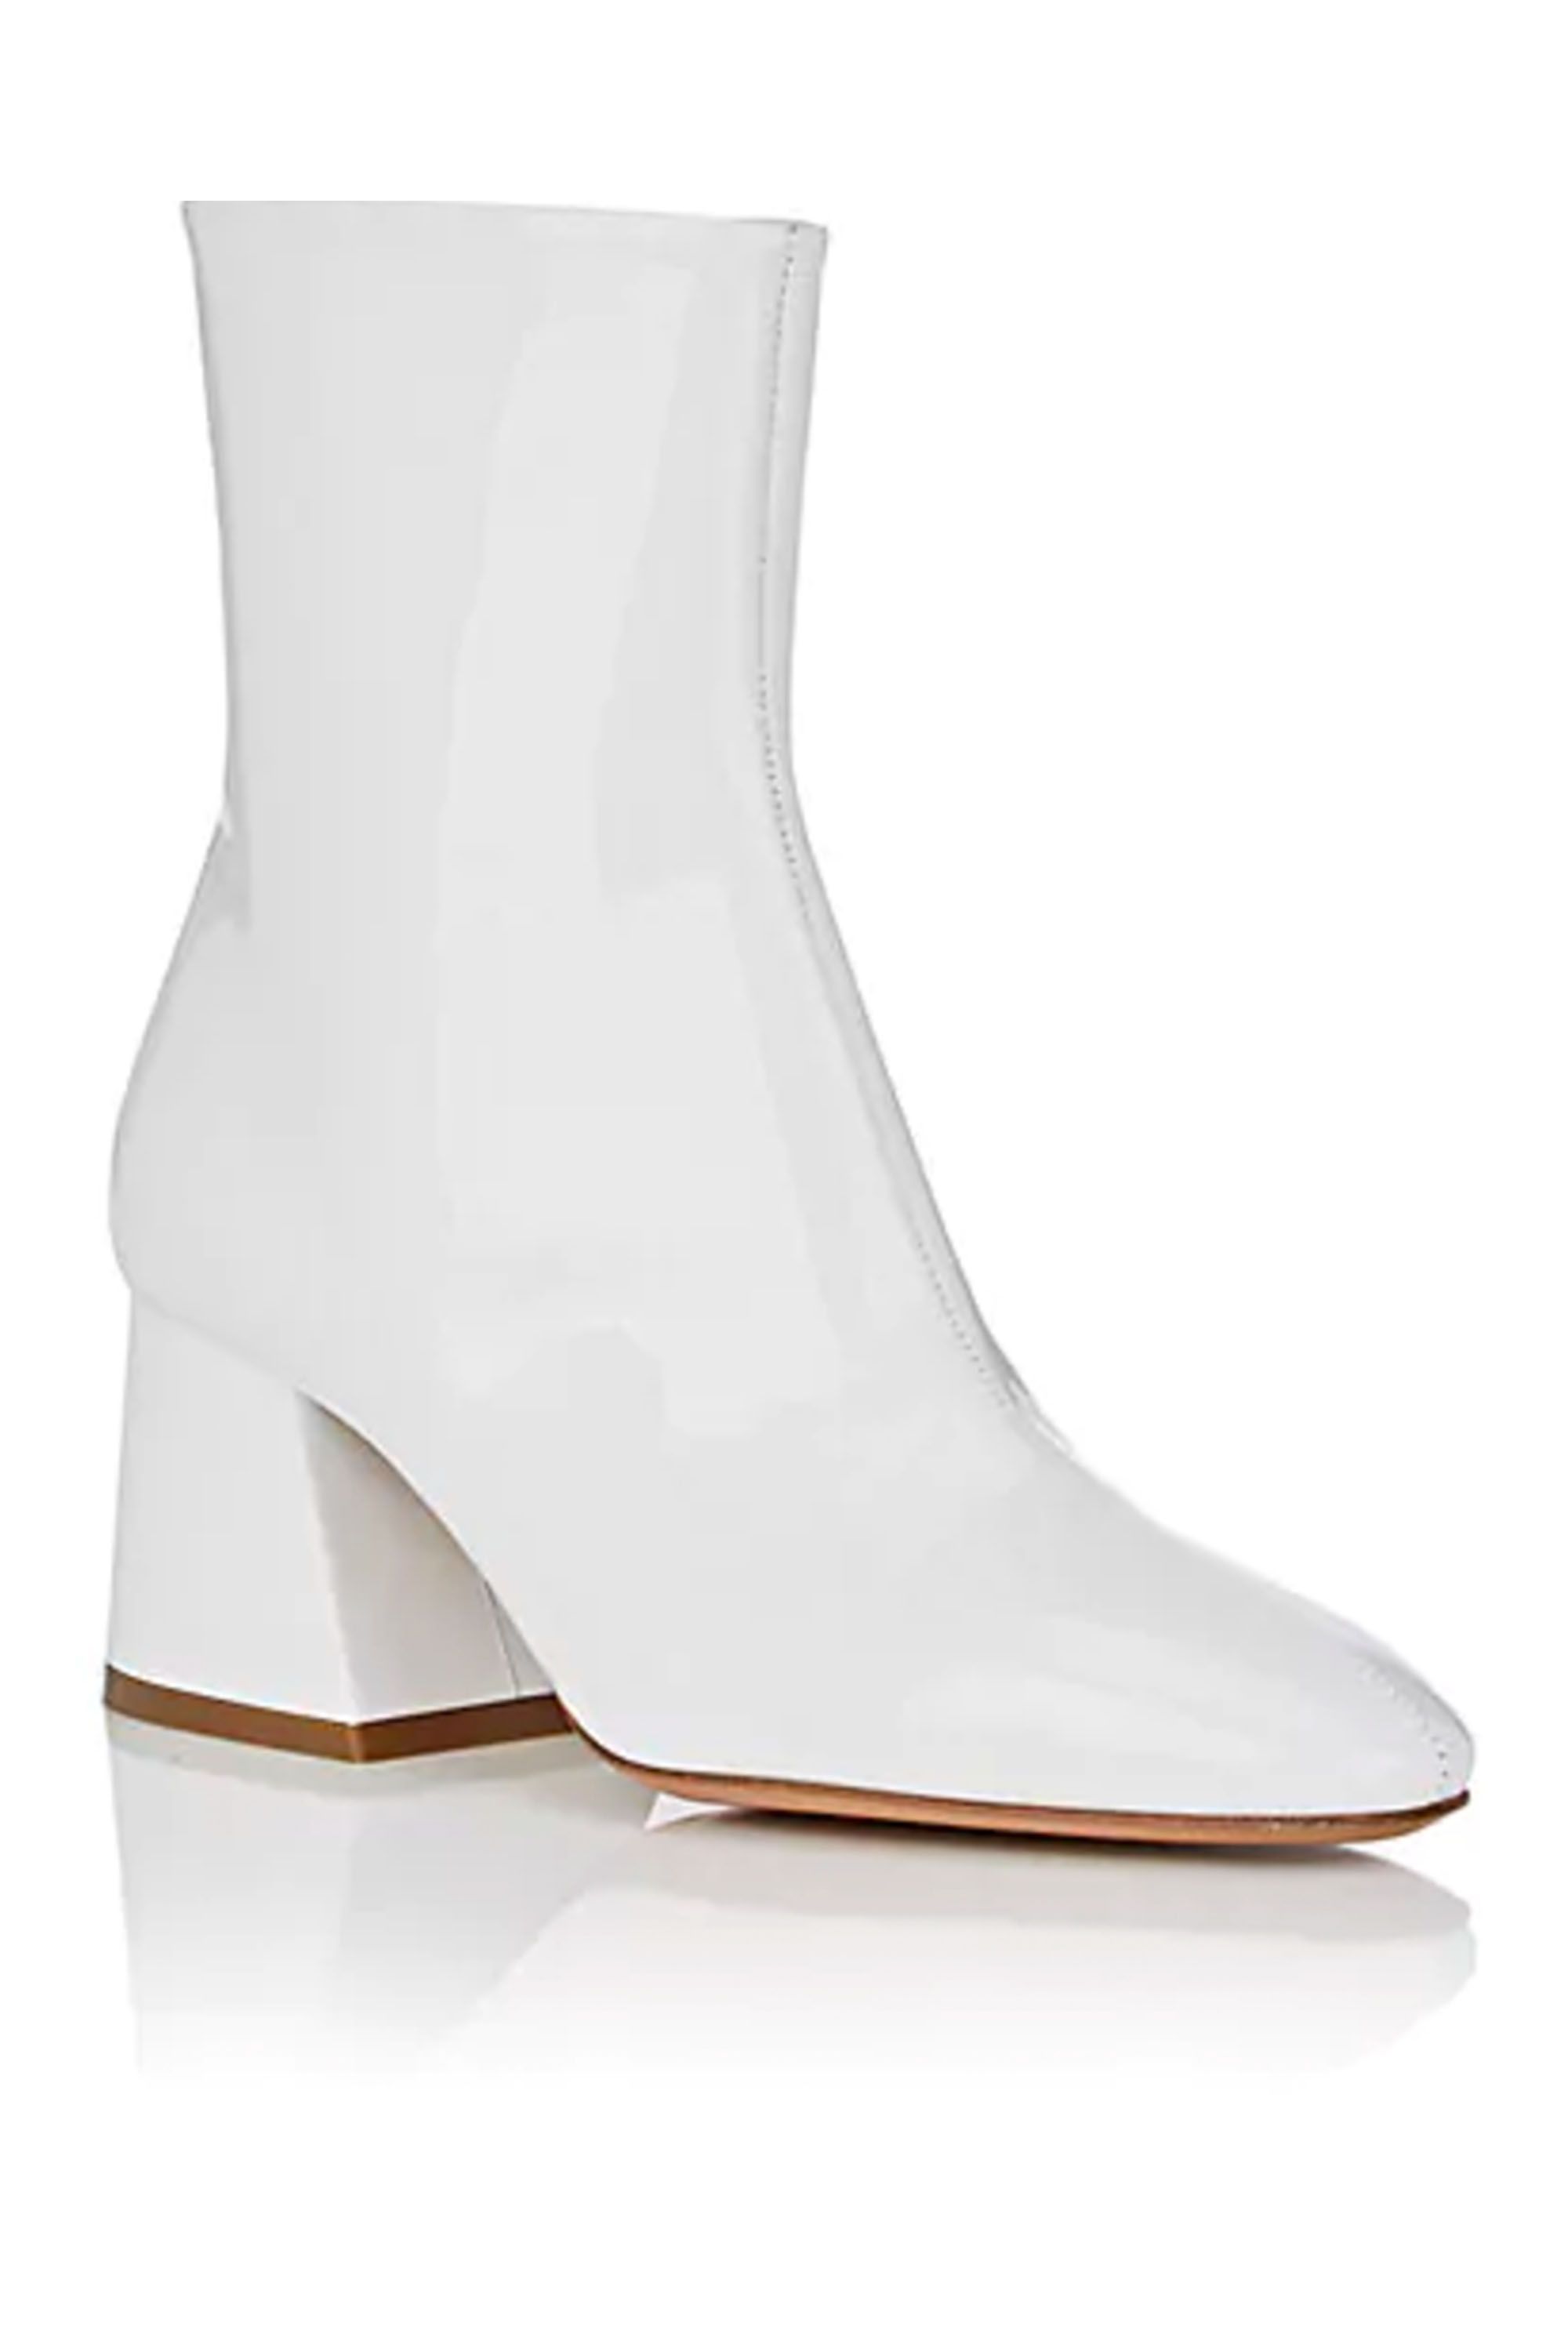 barneys white boots